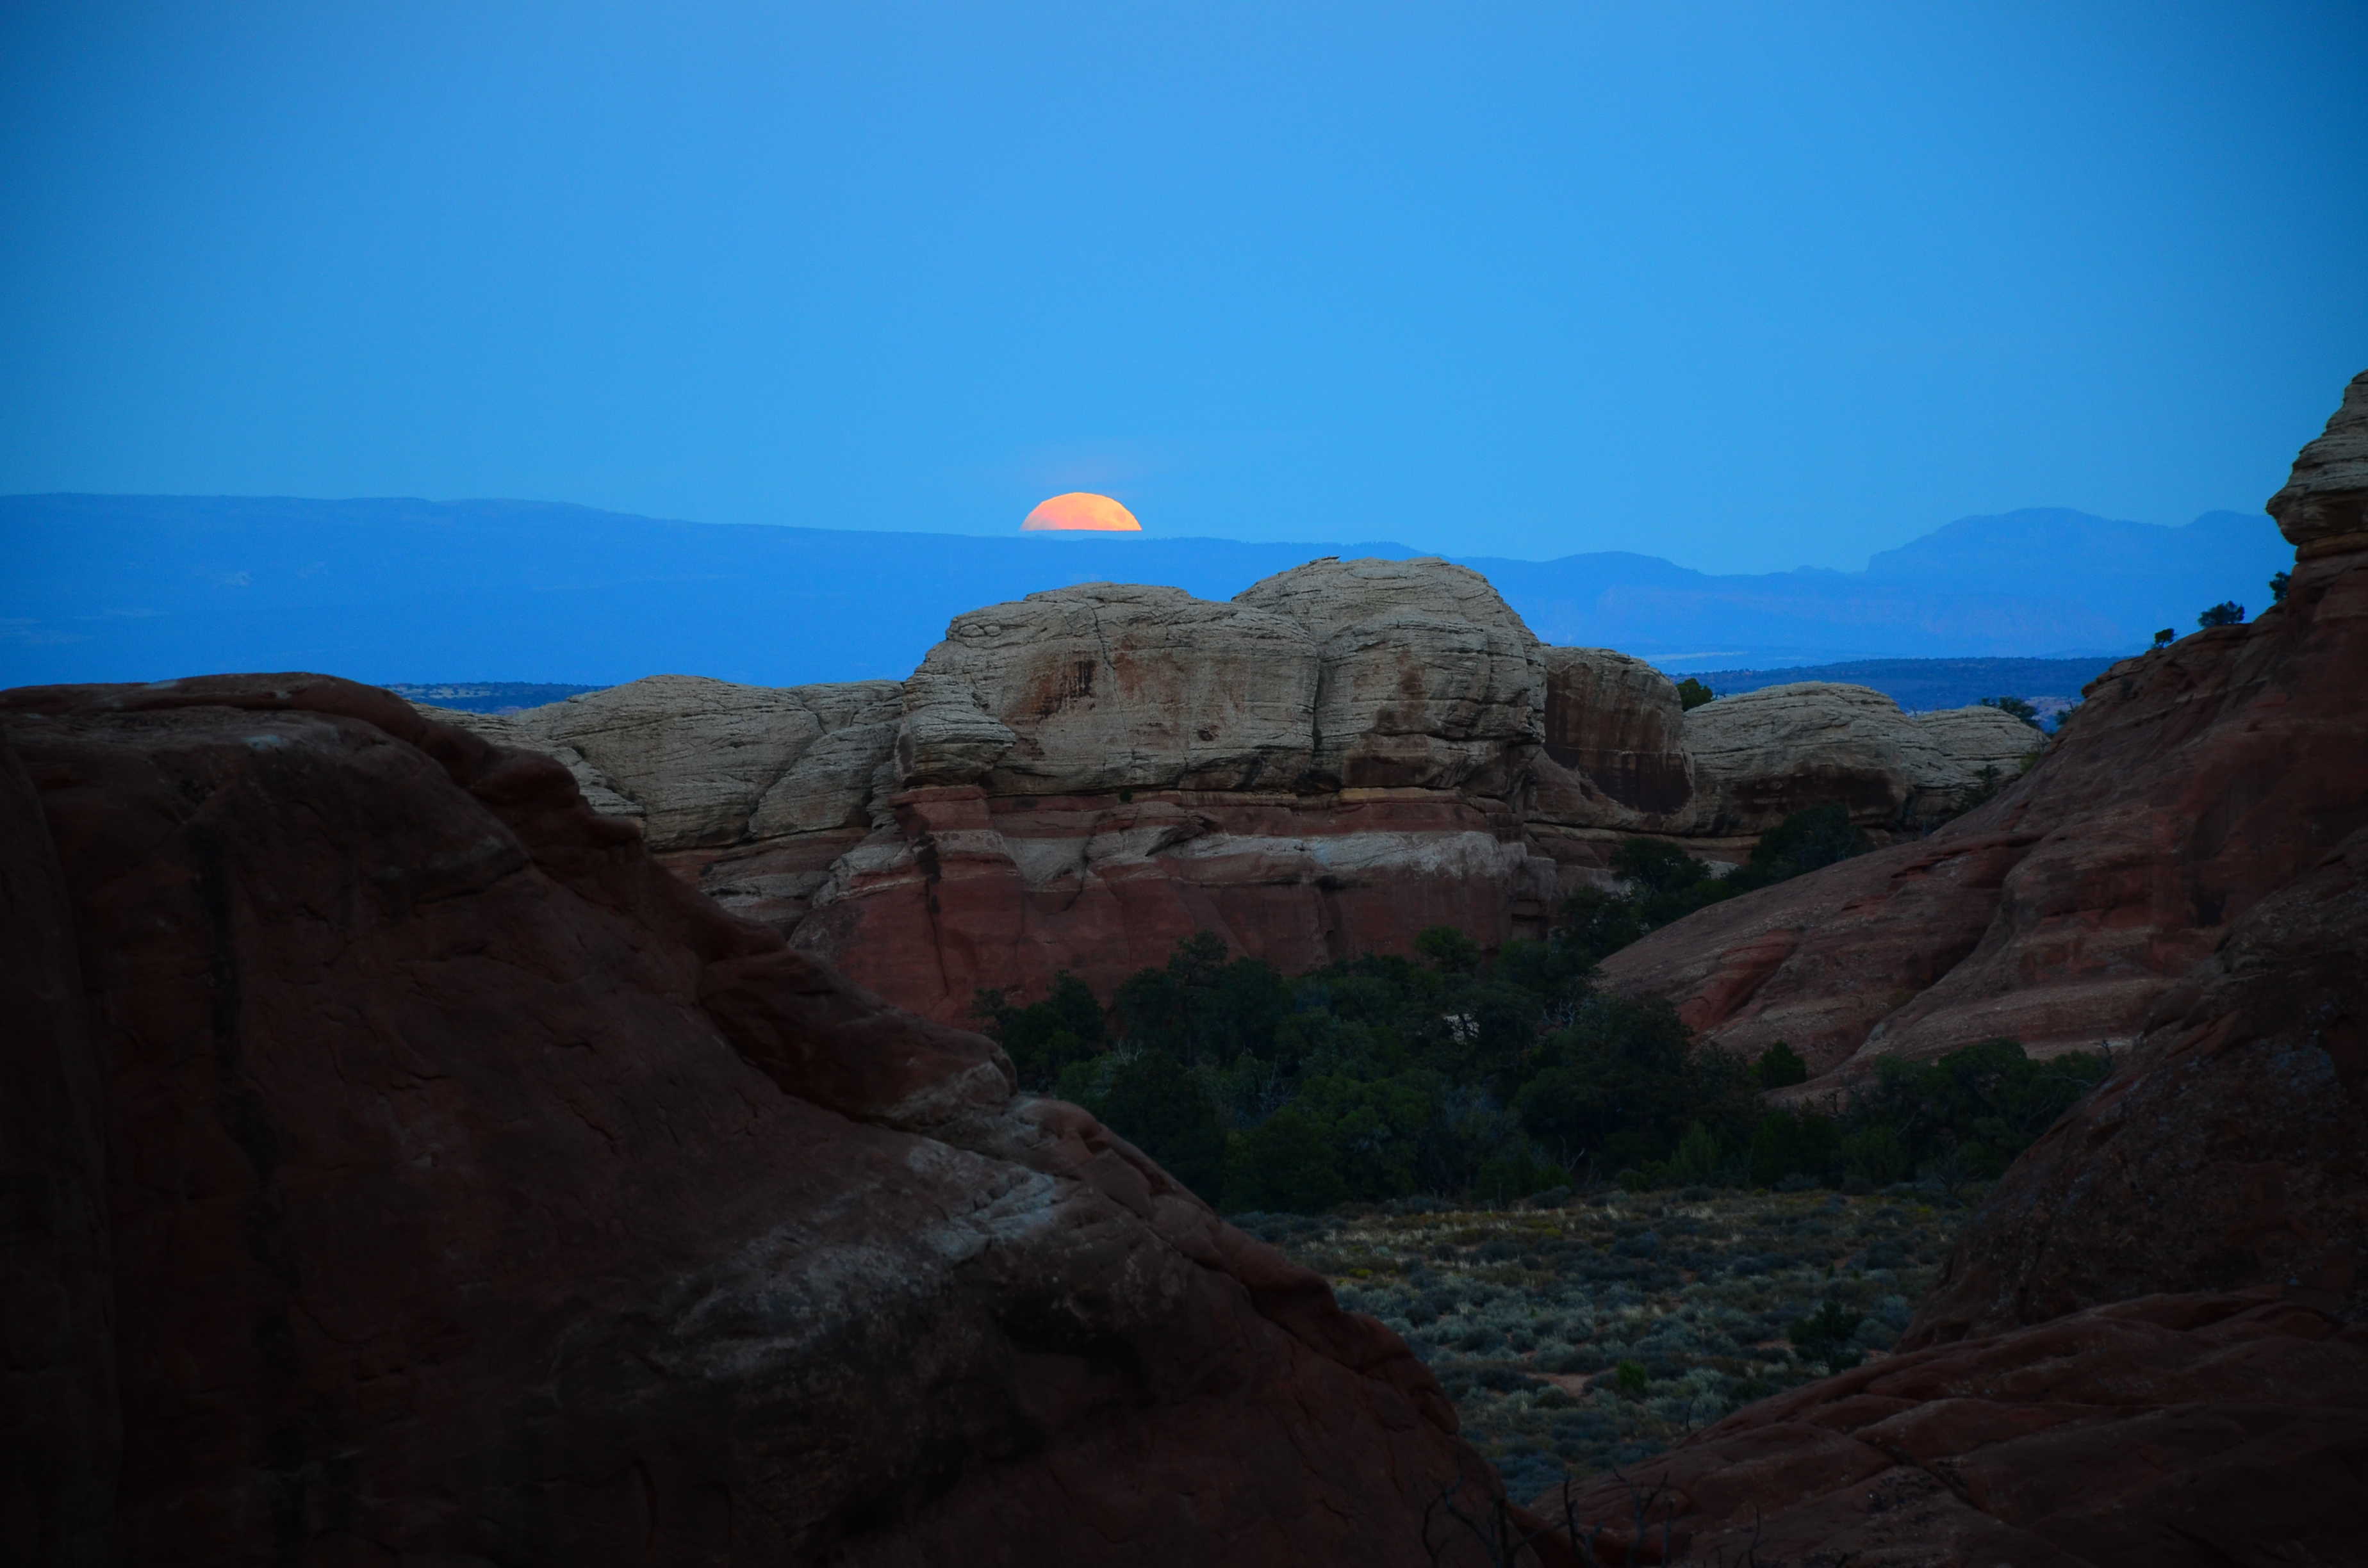 Blood moon on the Devil's Garden Trail at Arches National Park in Utah